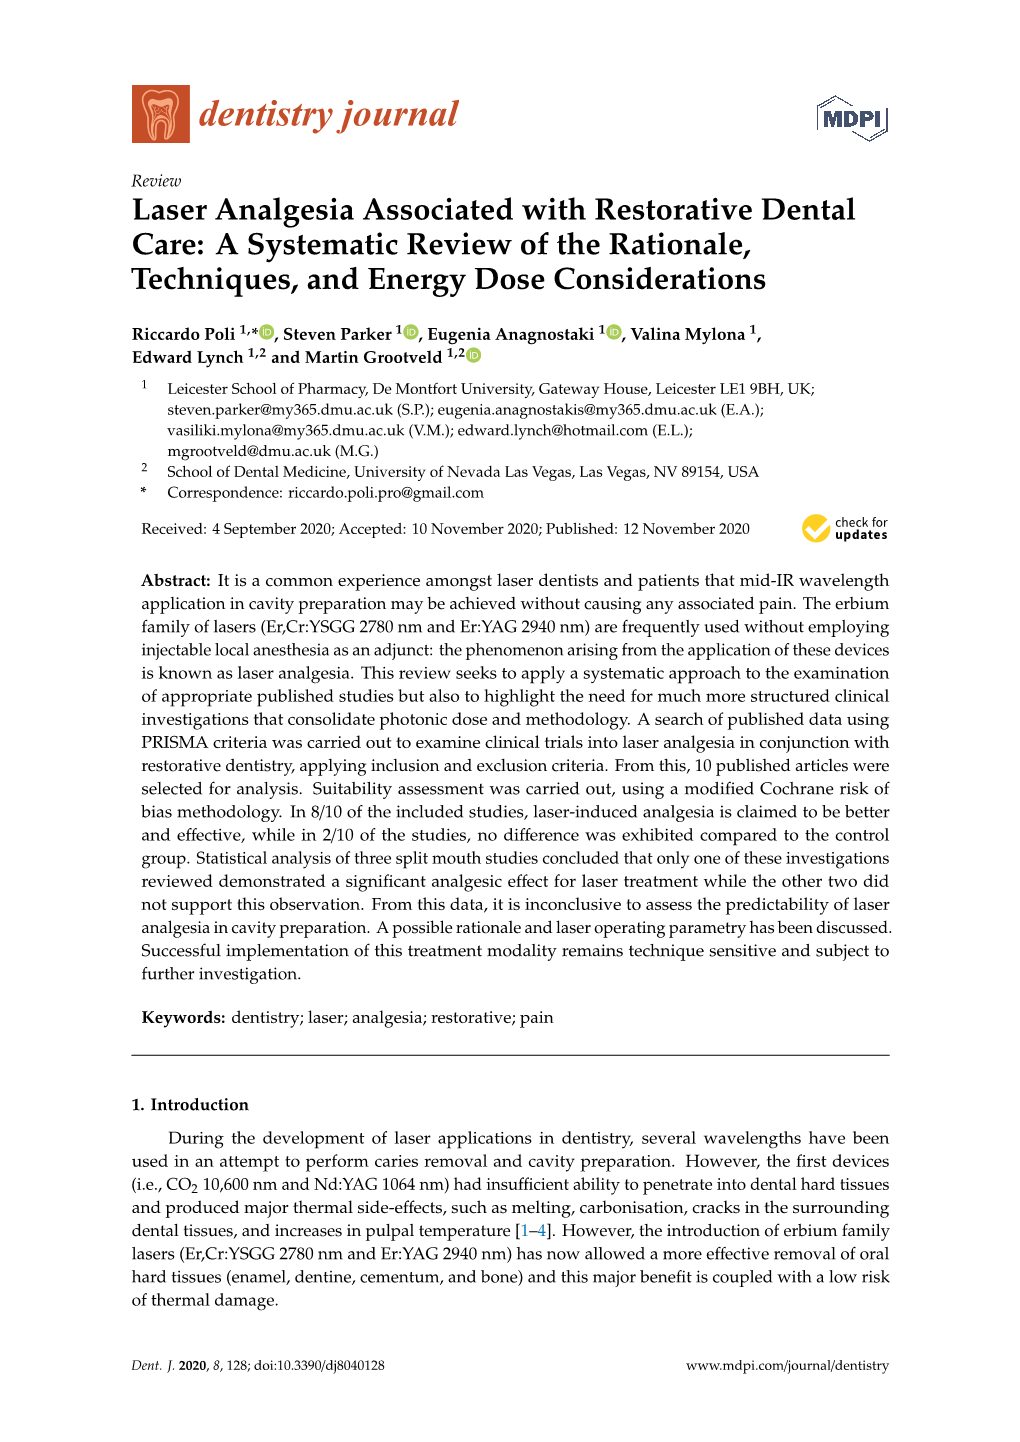 Laser Analgesia Associated with Restorative Dental Care: a Systematic Review of the Rationale, Techniques, and Energy Dose Considerations